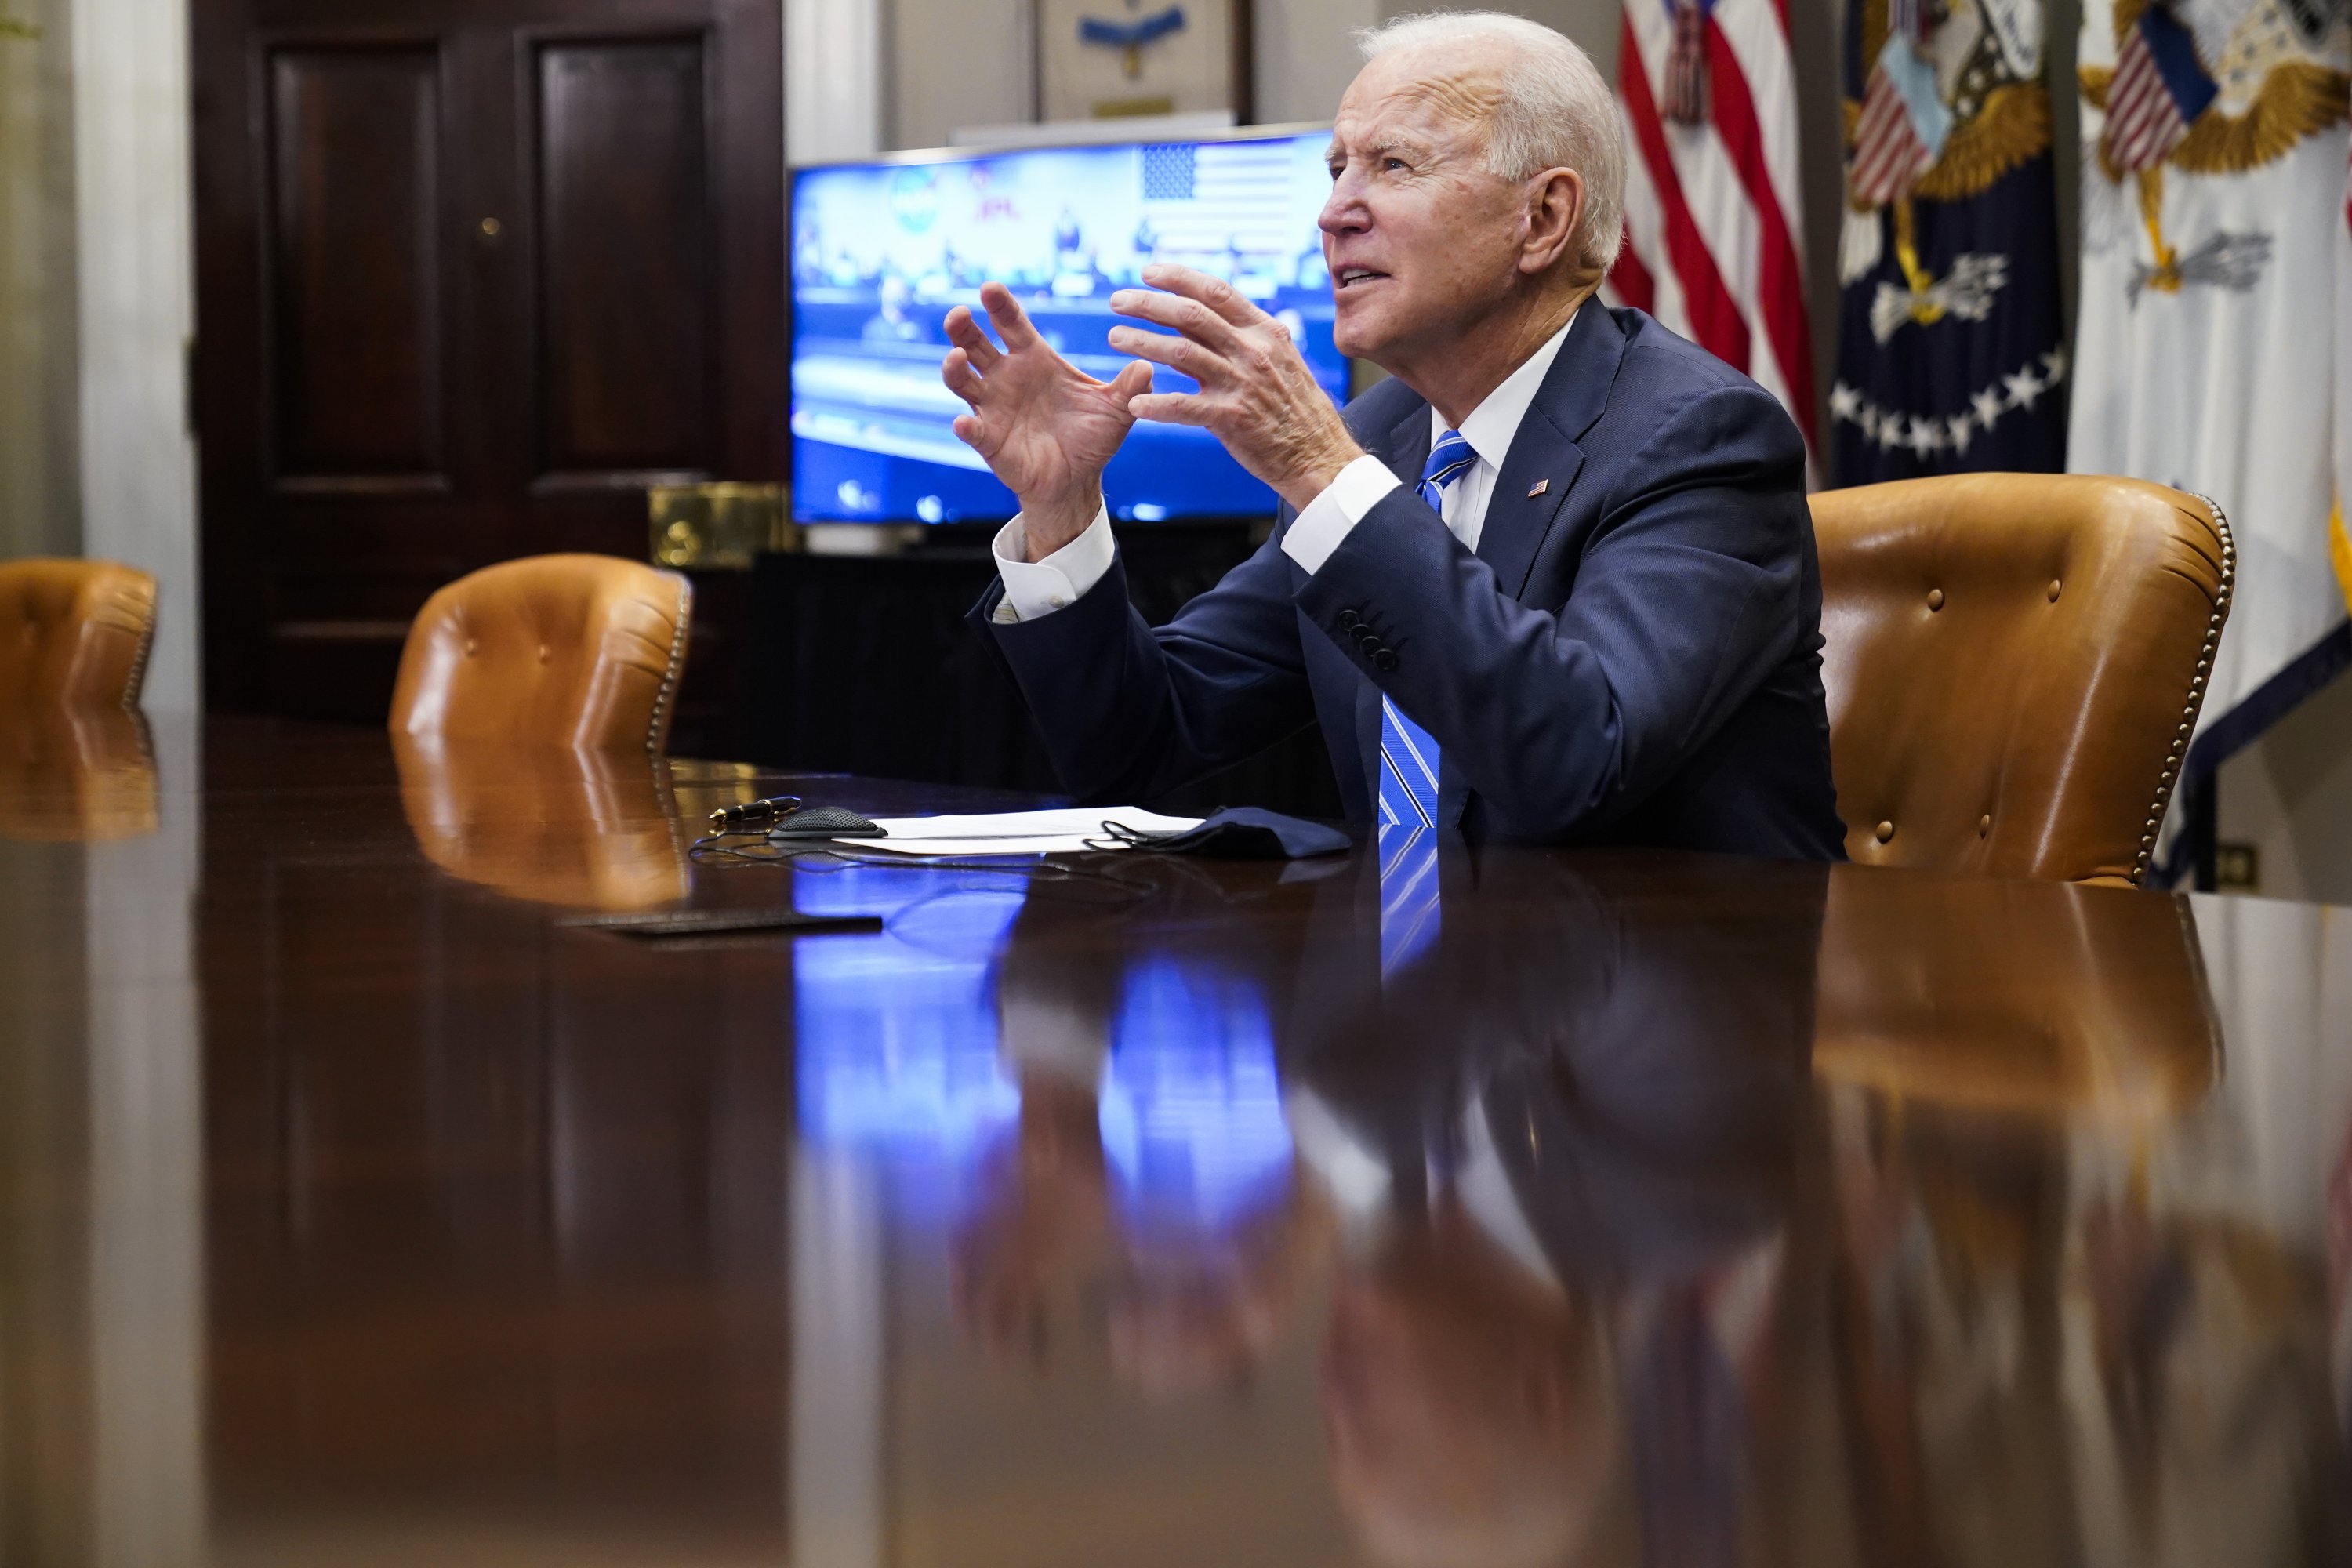 Americans widely support Biden’s response to the virus